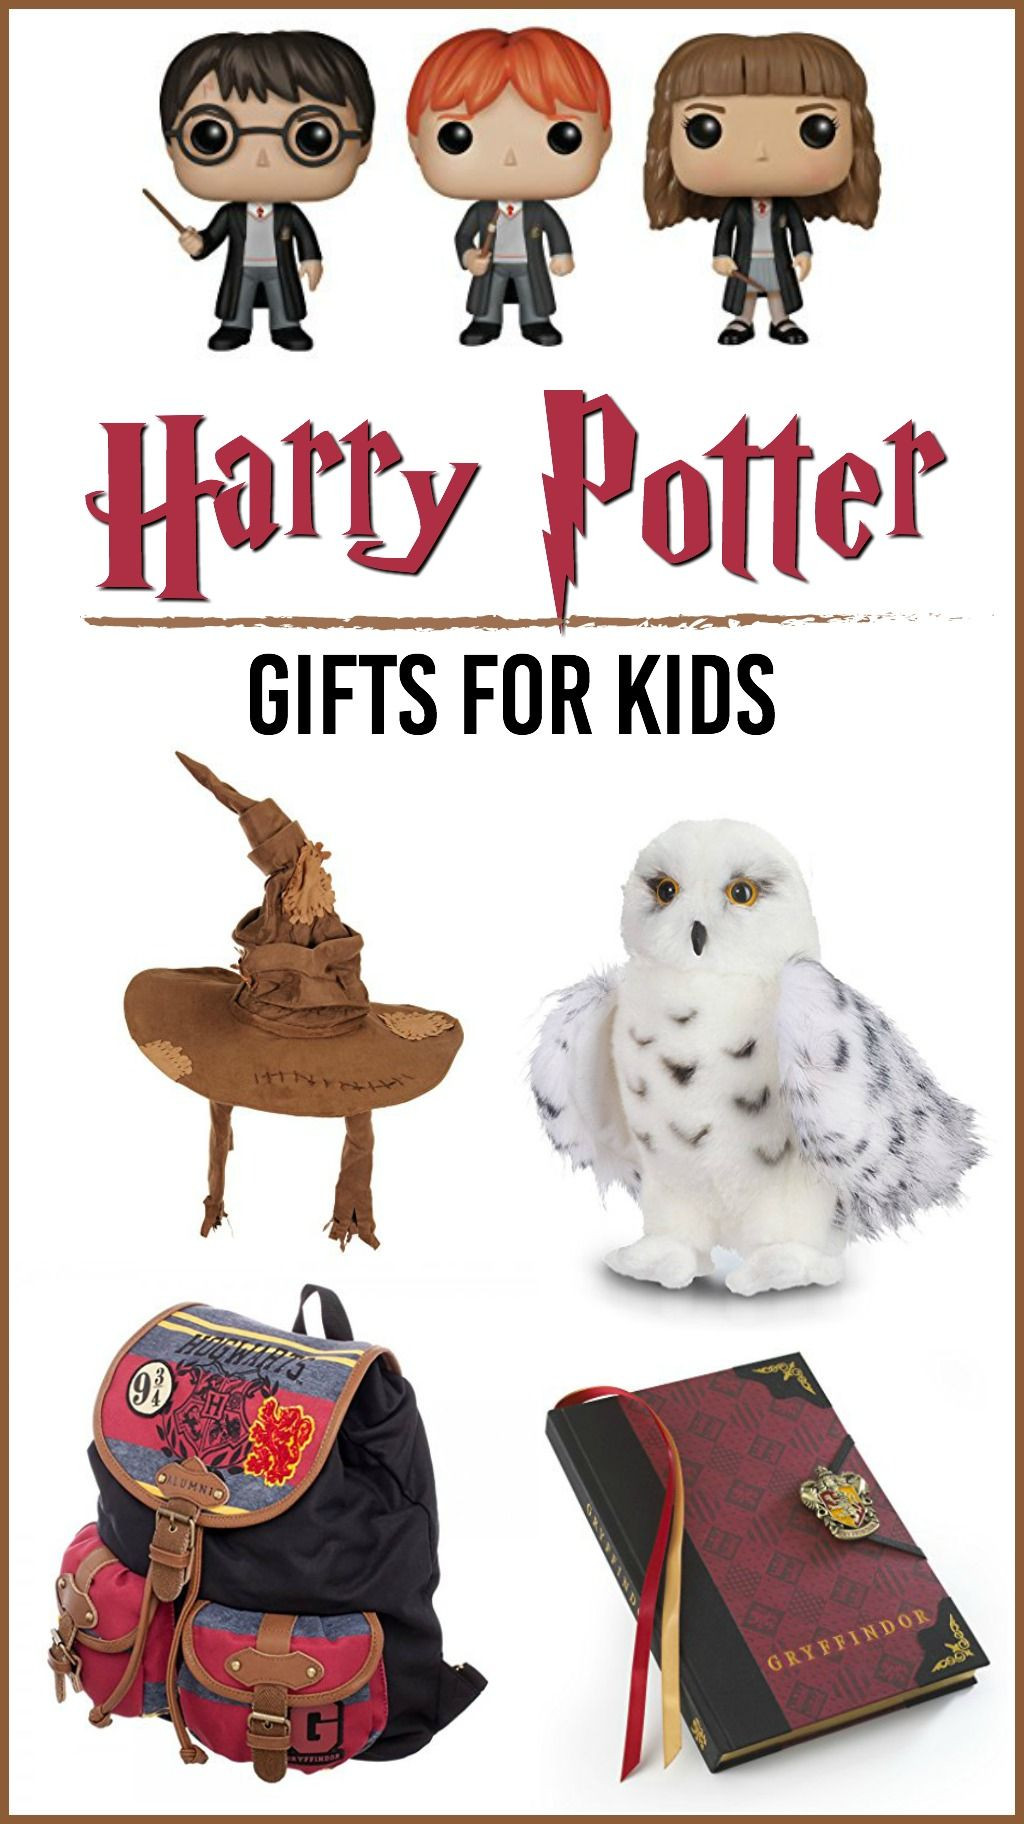 The 22 Best Ideas for Best Harry Potter Gifts for Kids Home, Family